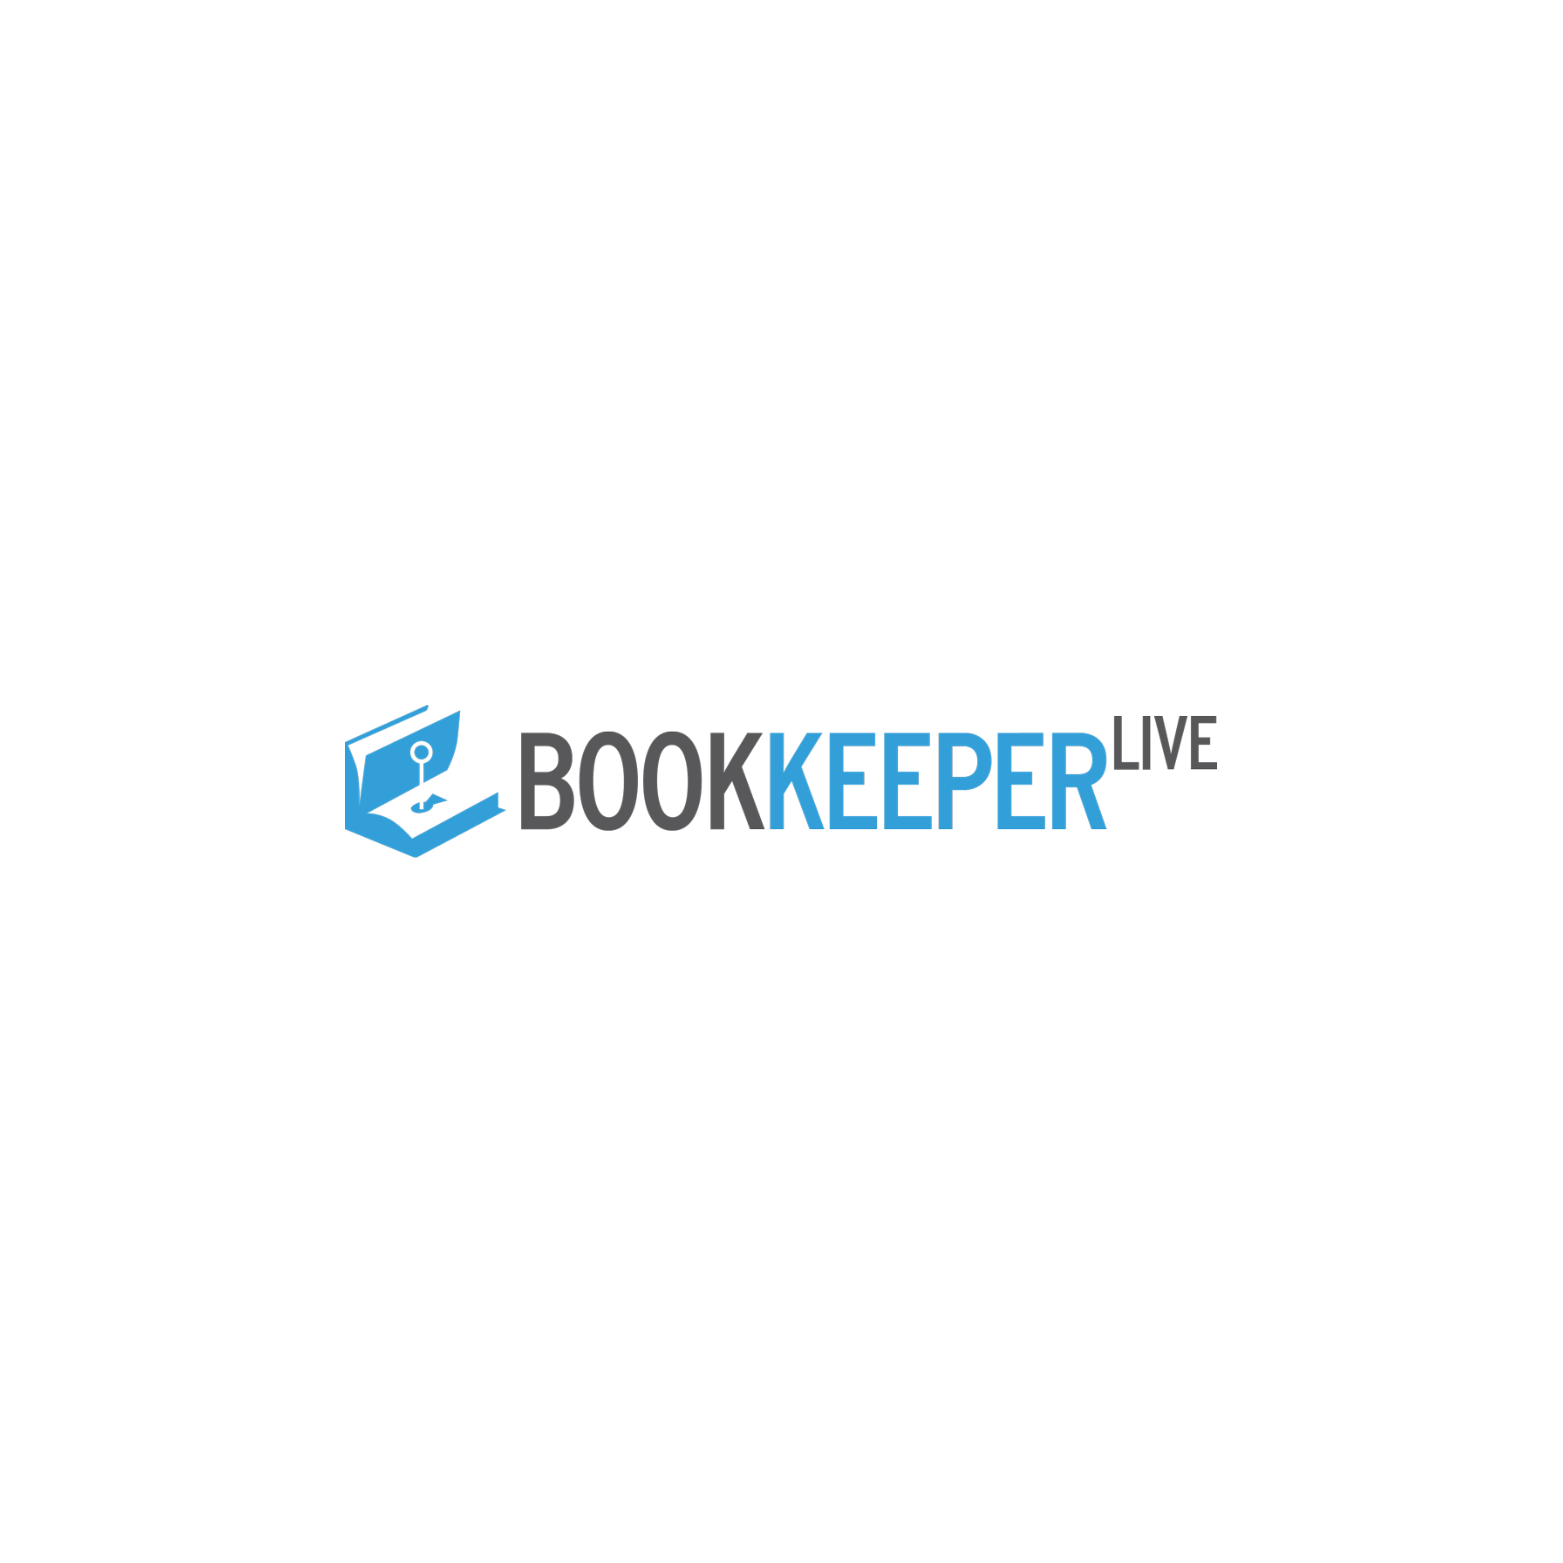 BookkeeperLive|Architect|Professional Services